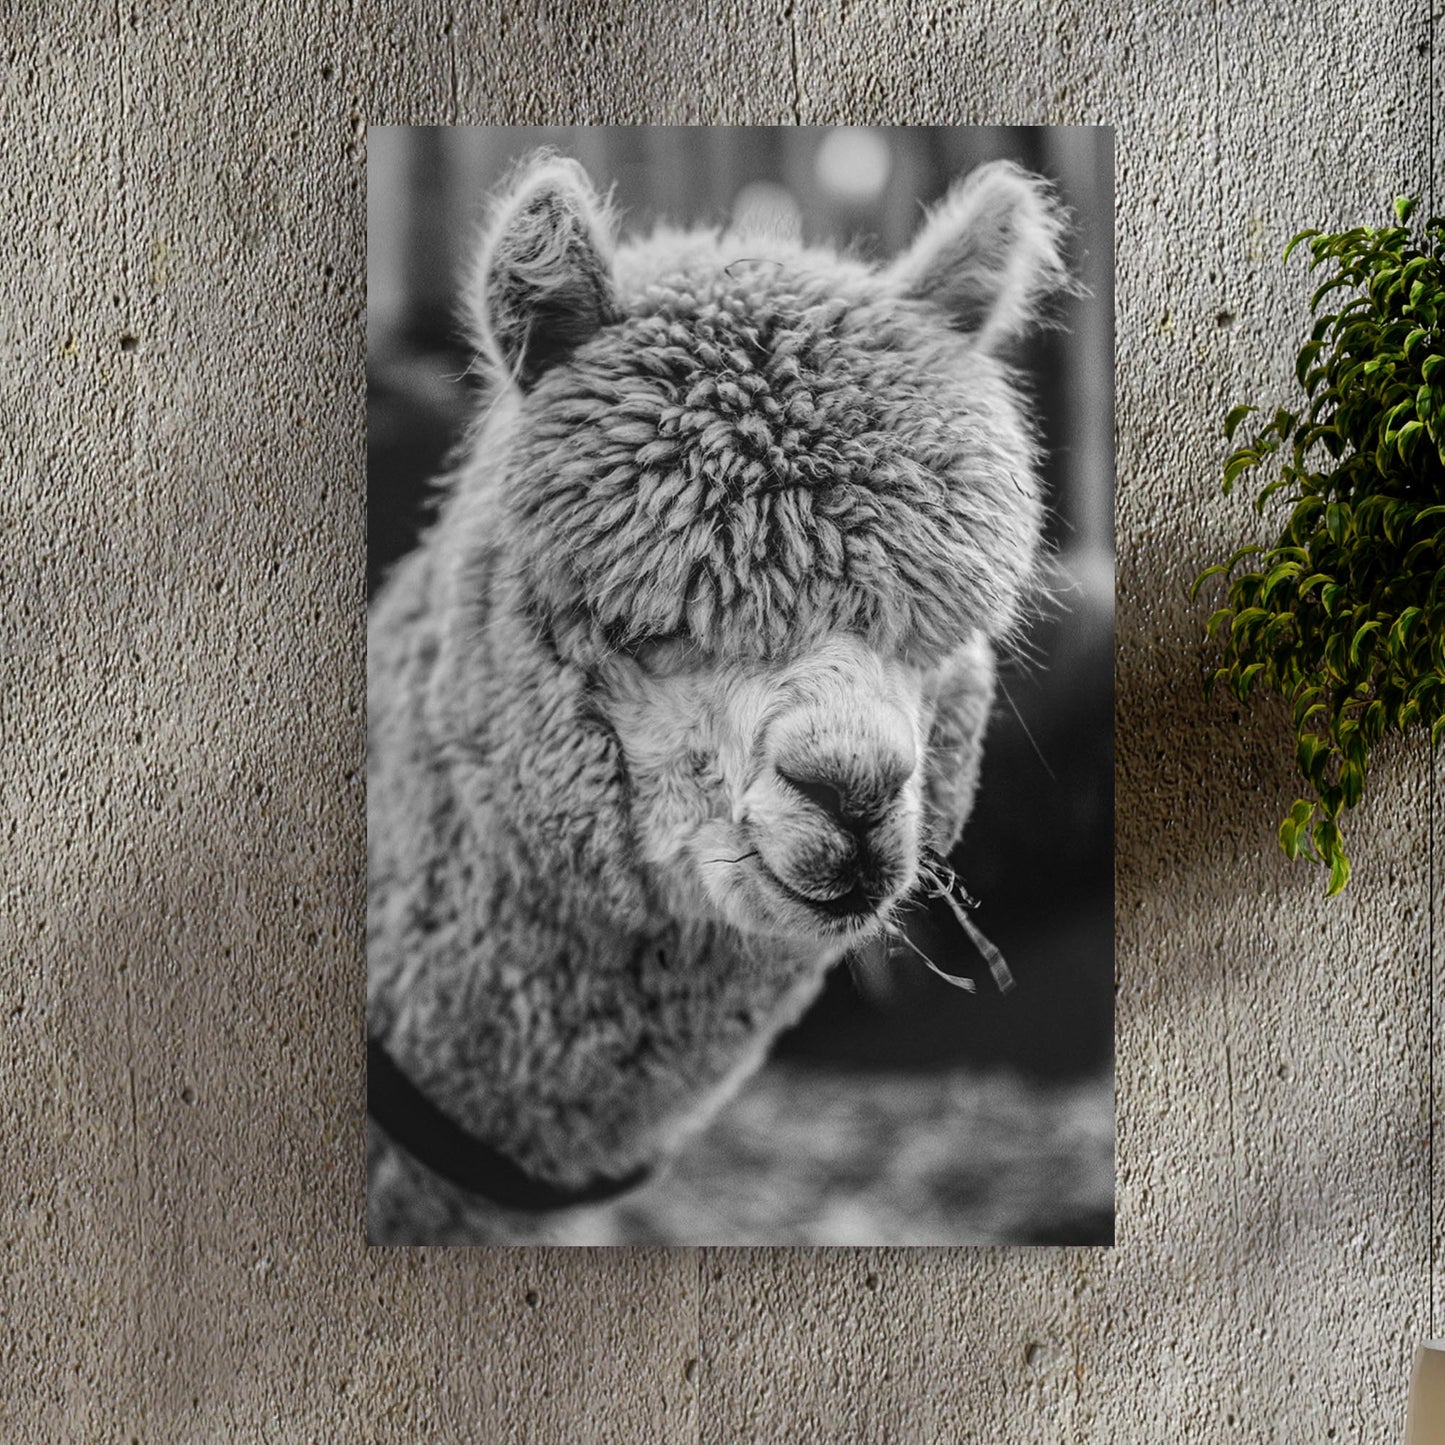 Monochrome Alpaca Up Close Portrait Canvas Wall Art - Image by Tailored Canvases